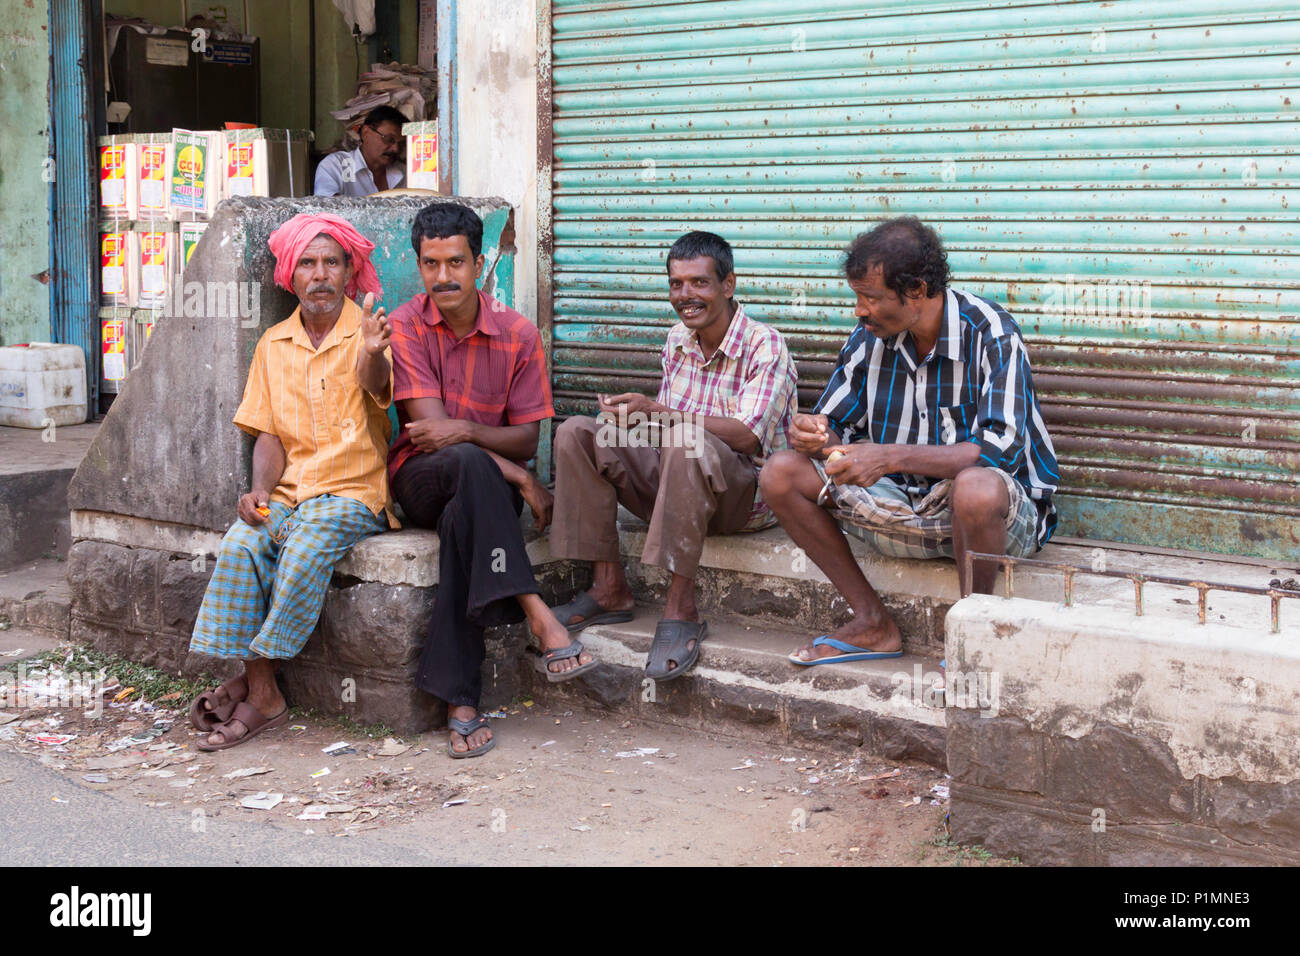 Four men seated outside a shop with the roller shutters down in Kochi, Kerala, India. Stock Photo